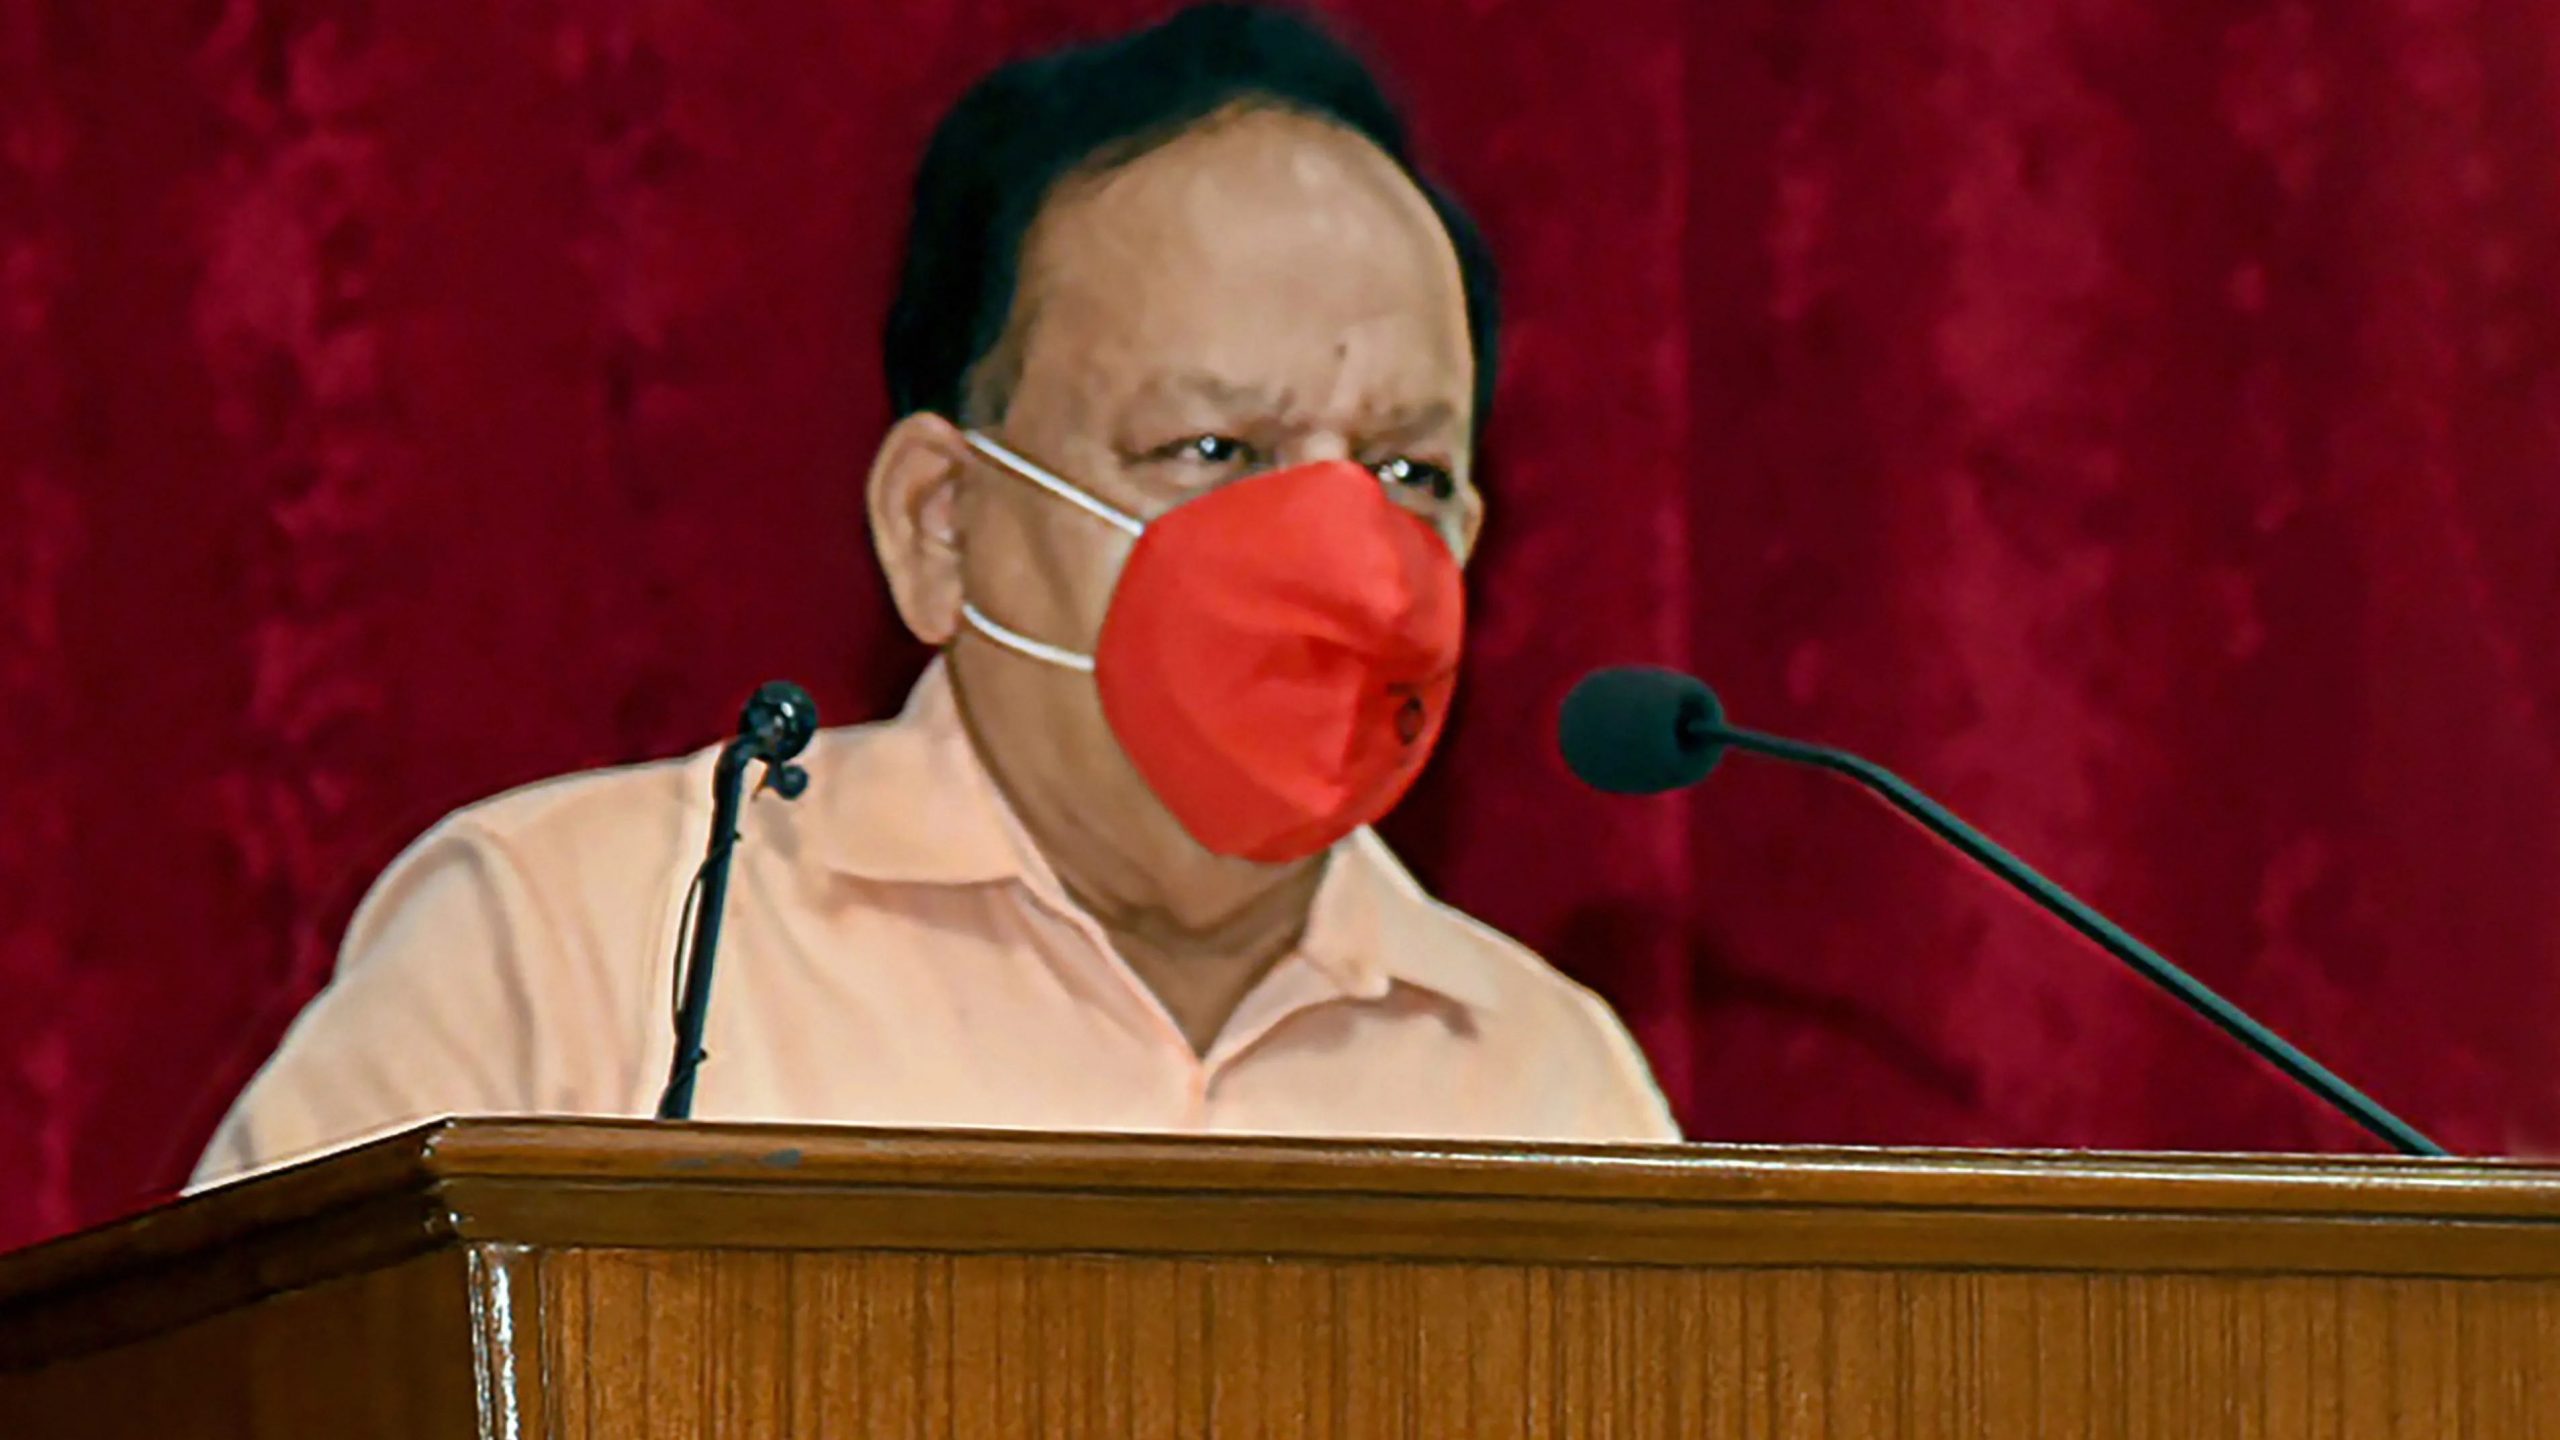 Evidence suggests smoking increases risk of COVID-19: Health Minister Harsh Vardhan